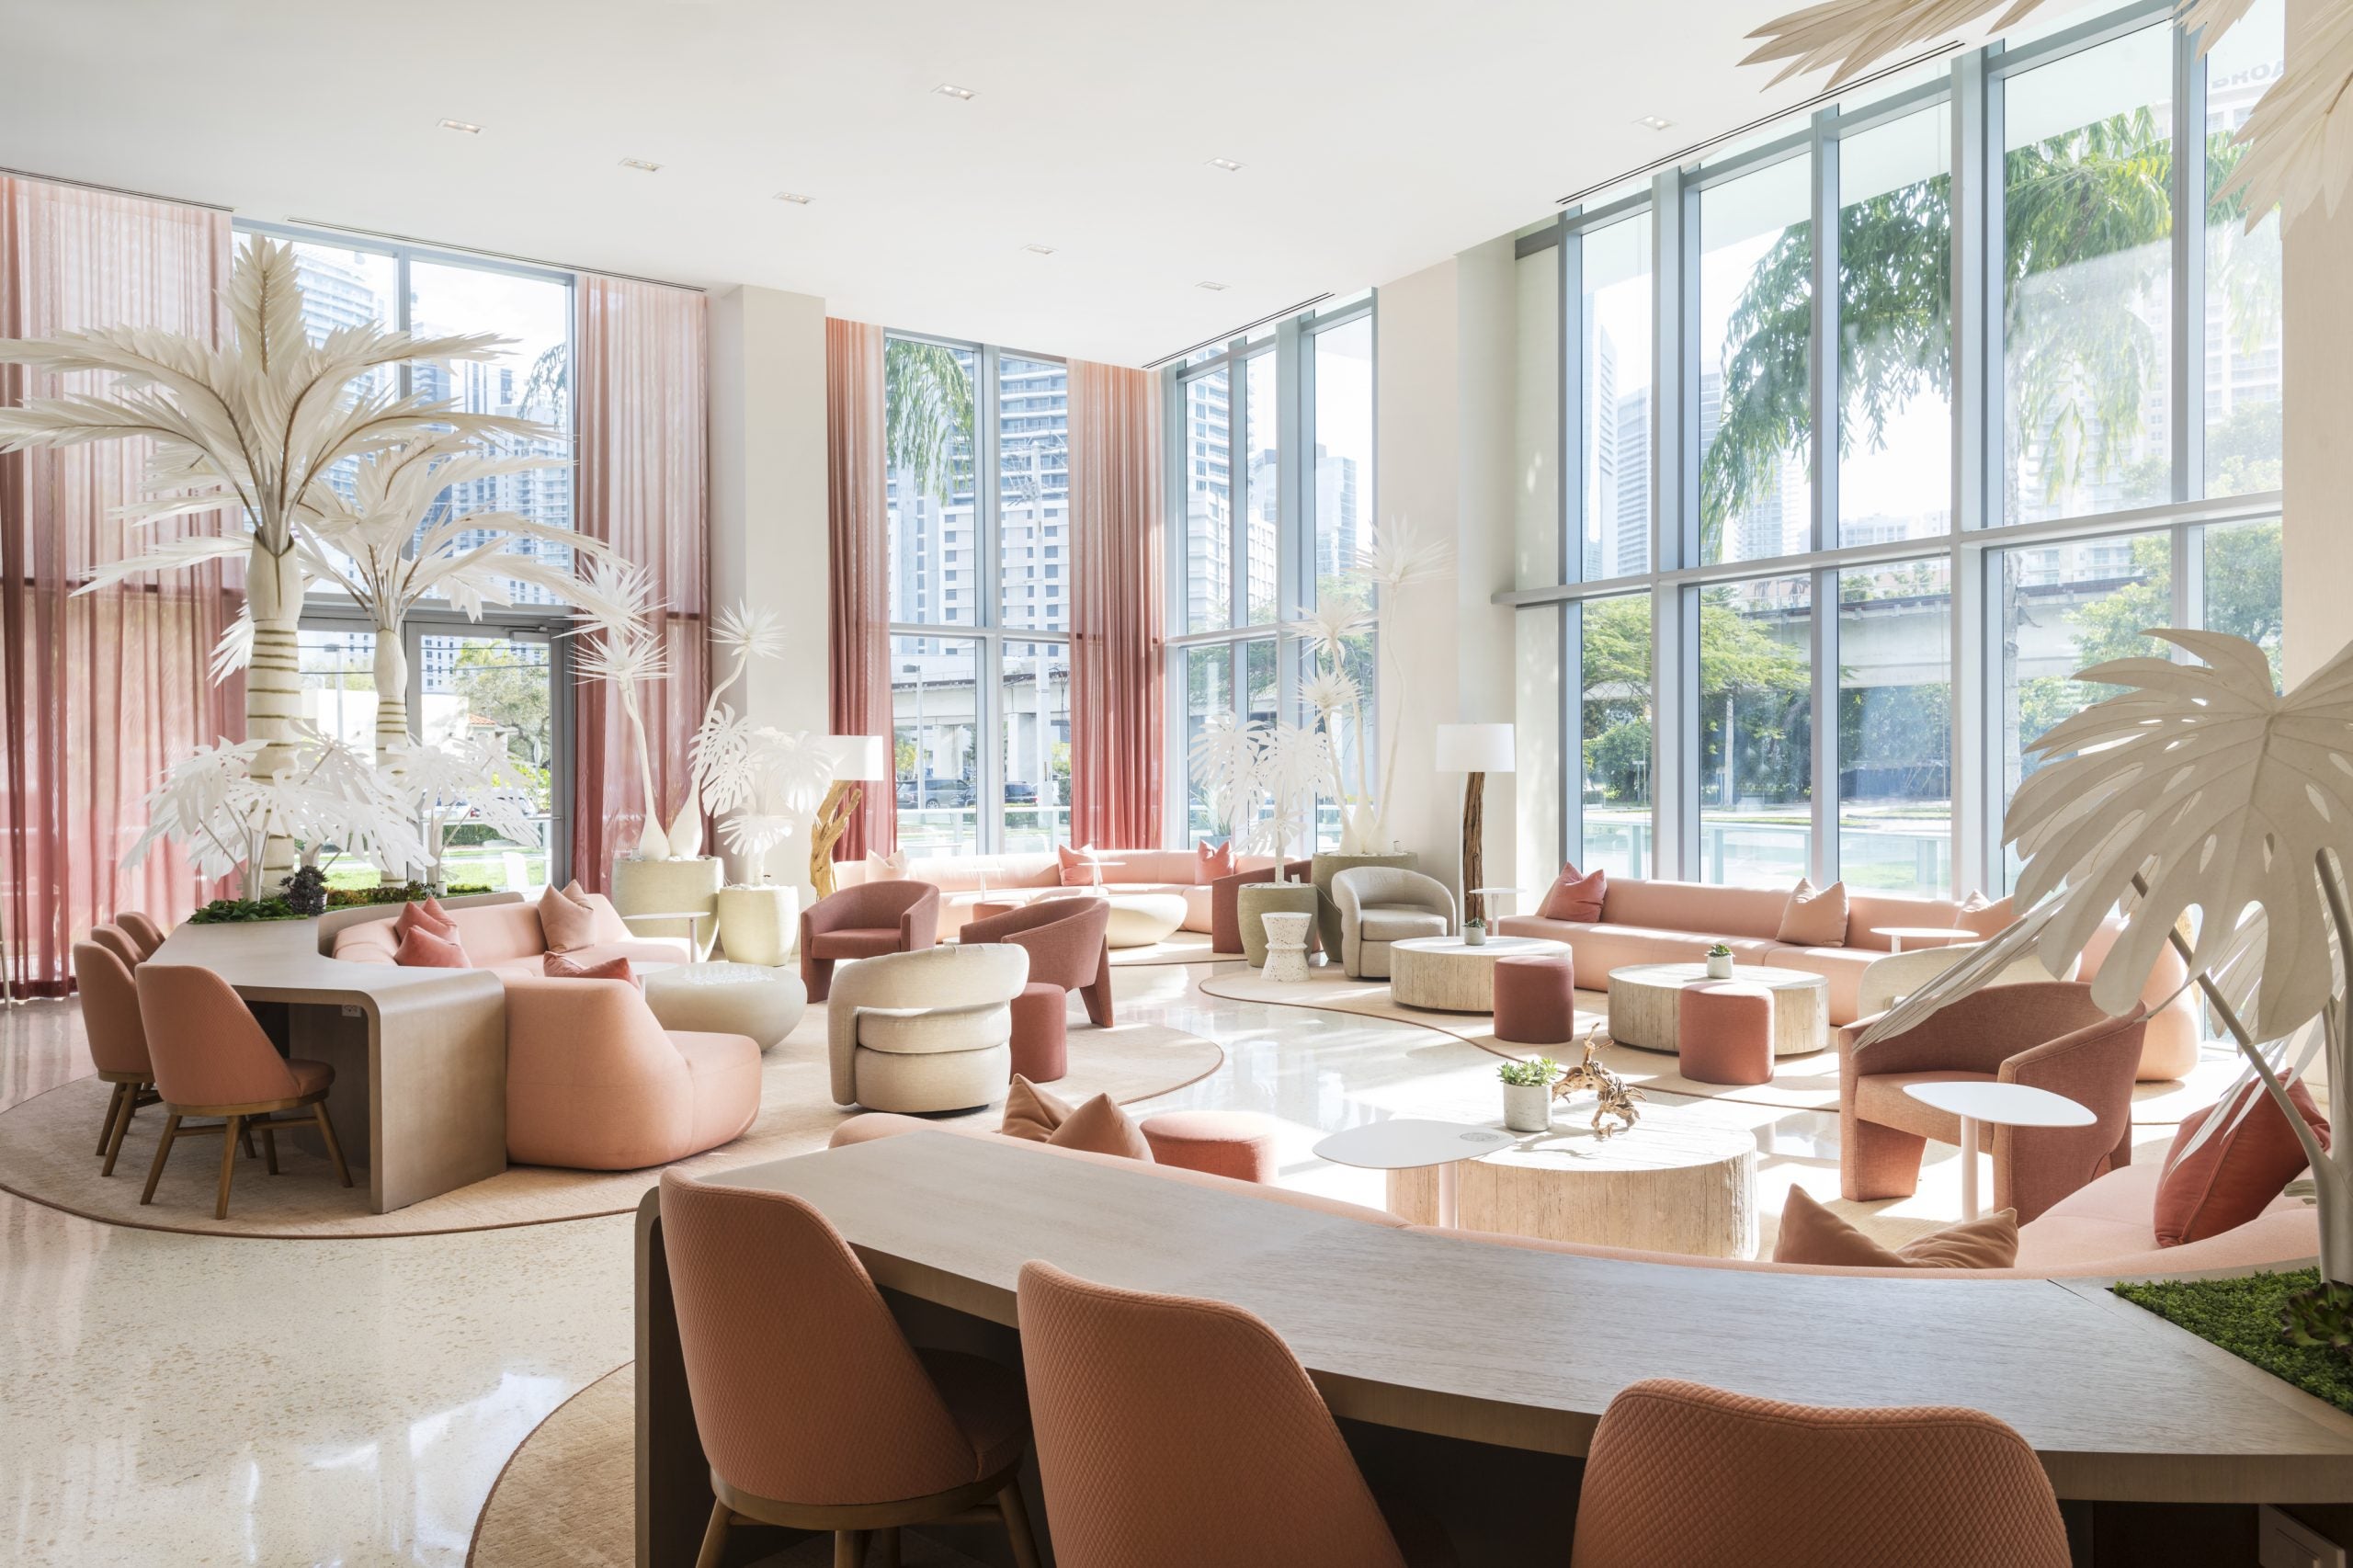 Hotel Review: Ditch The Crowd And Do Downtown Miami With A Stay At This Trendy Hotel